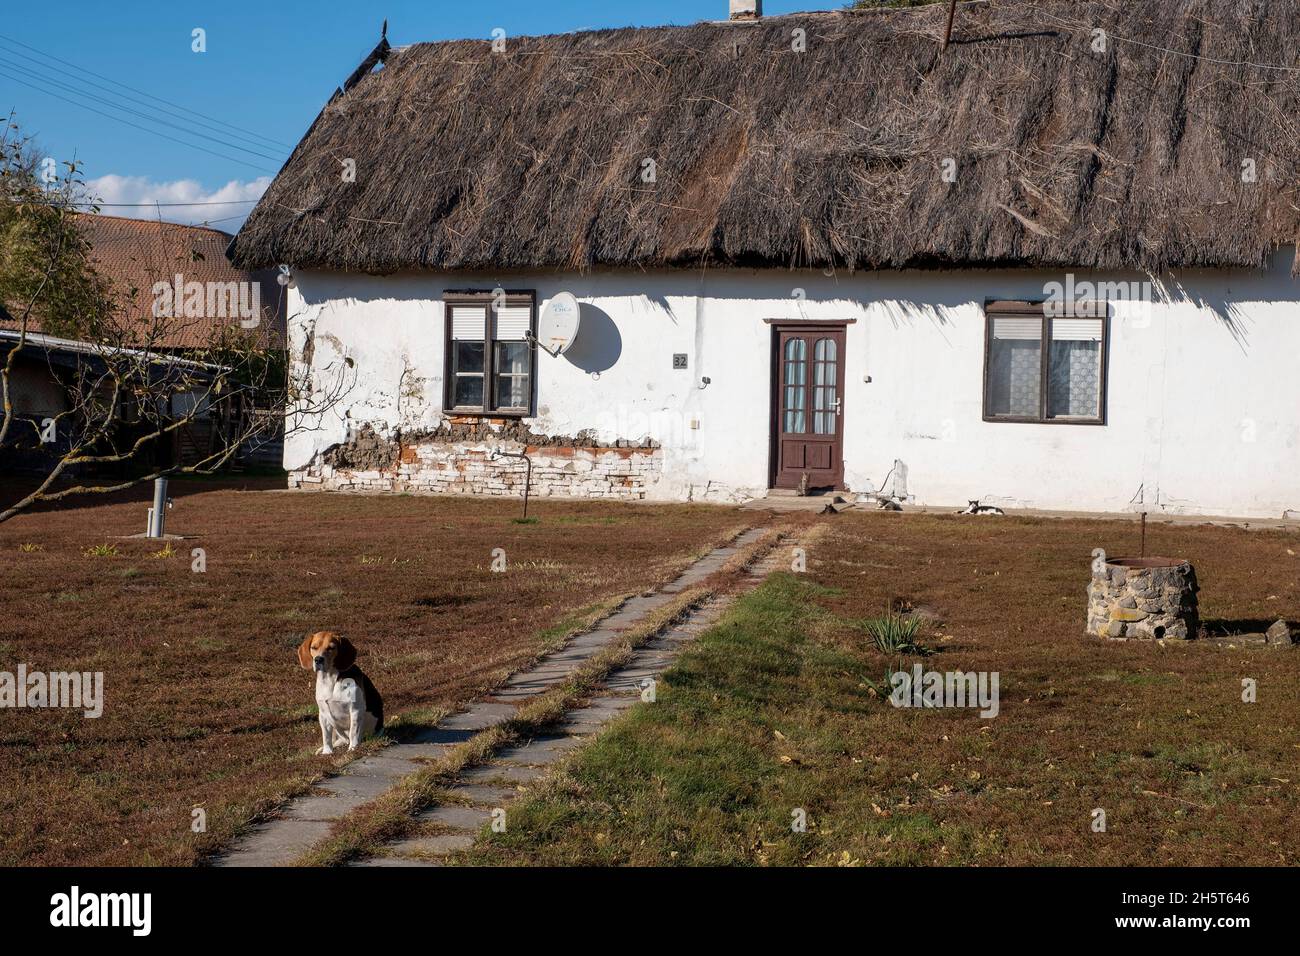 A Beagle sitting in front of a cottage with thatched roof in Hortobagy National Park, Hungary Stock Photo